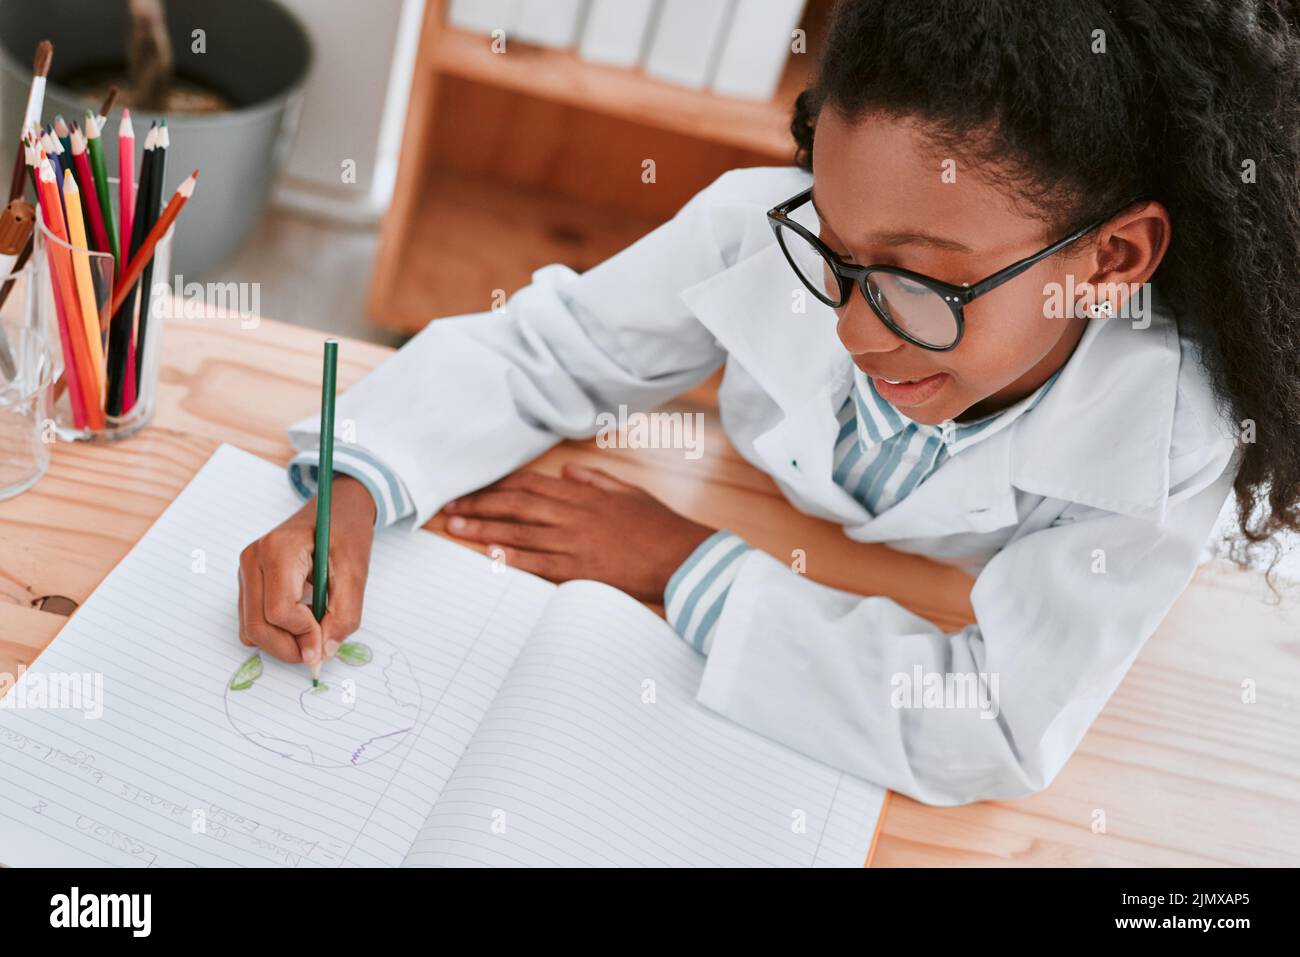 Sometimes you have to draw things into perspective. an adorable young school girl drawing a diagram in her exercise book in science class at school. Stock Photo